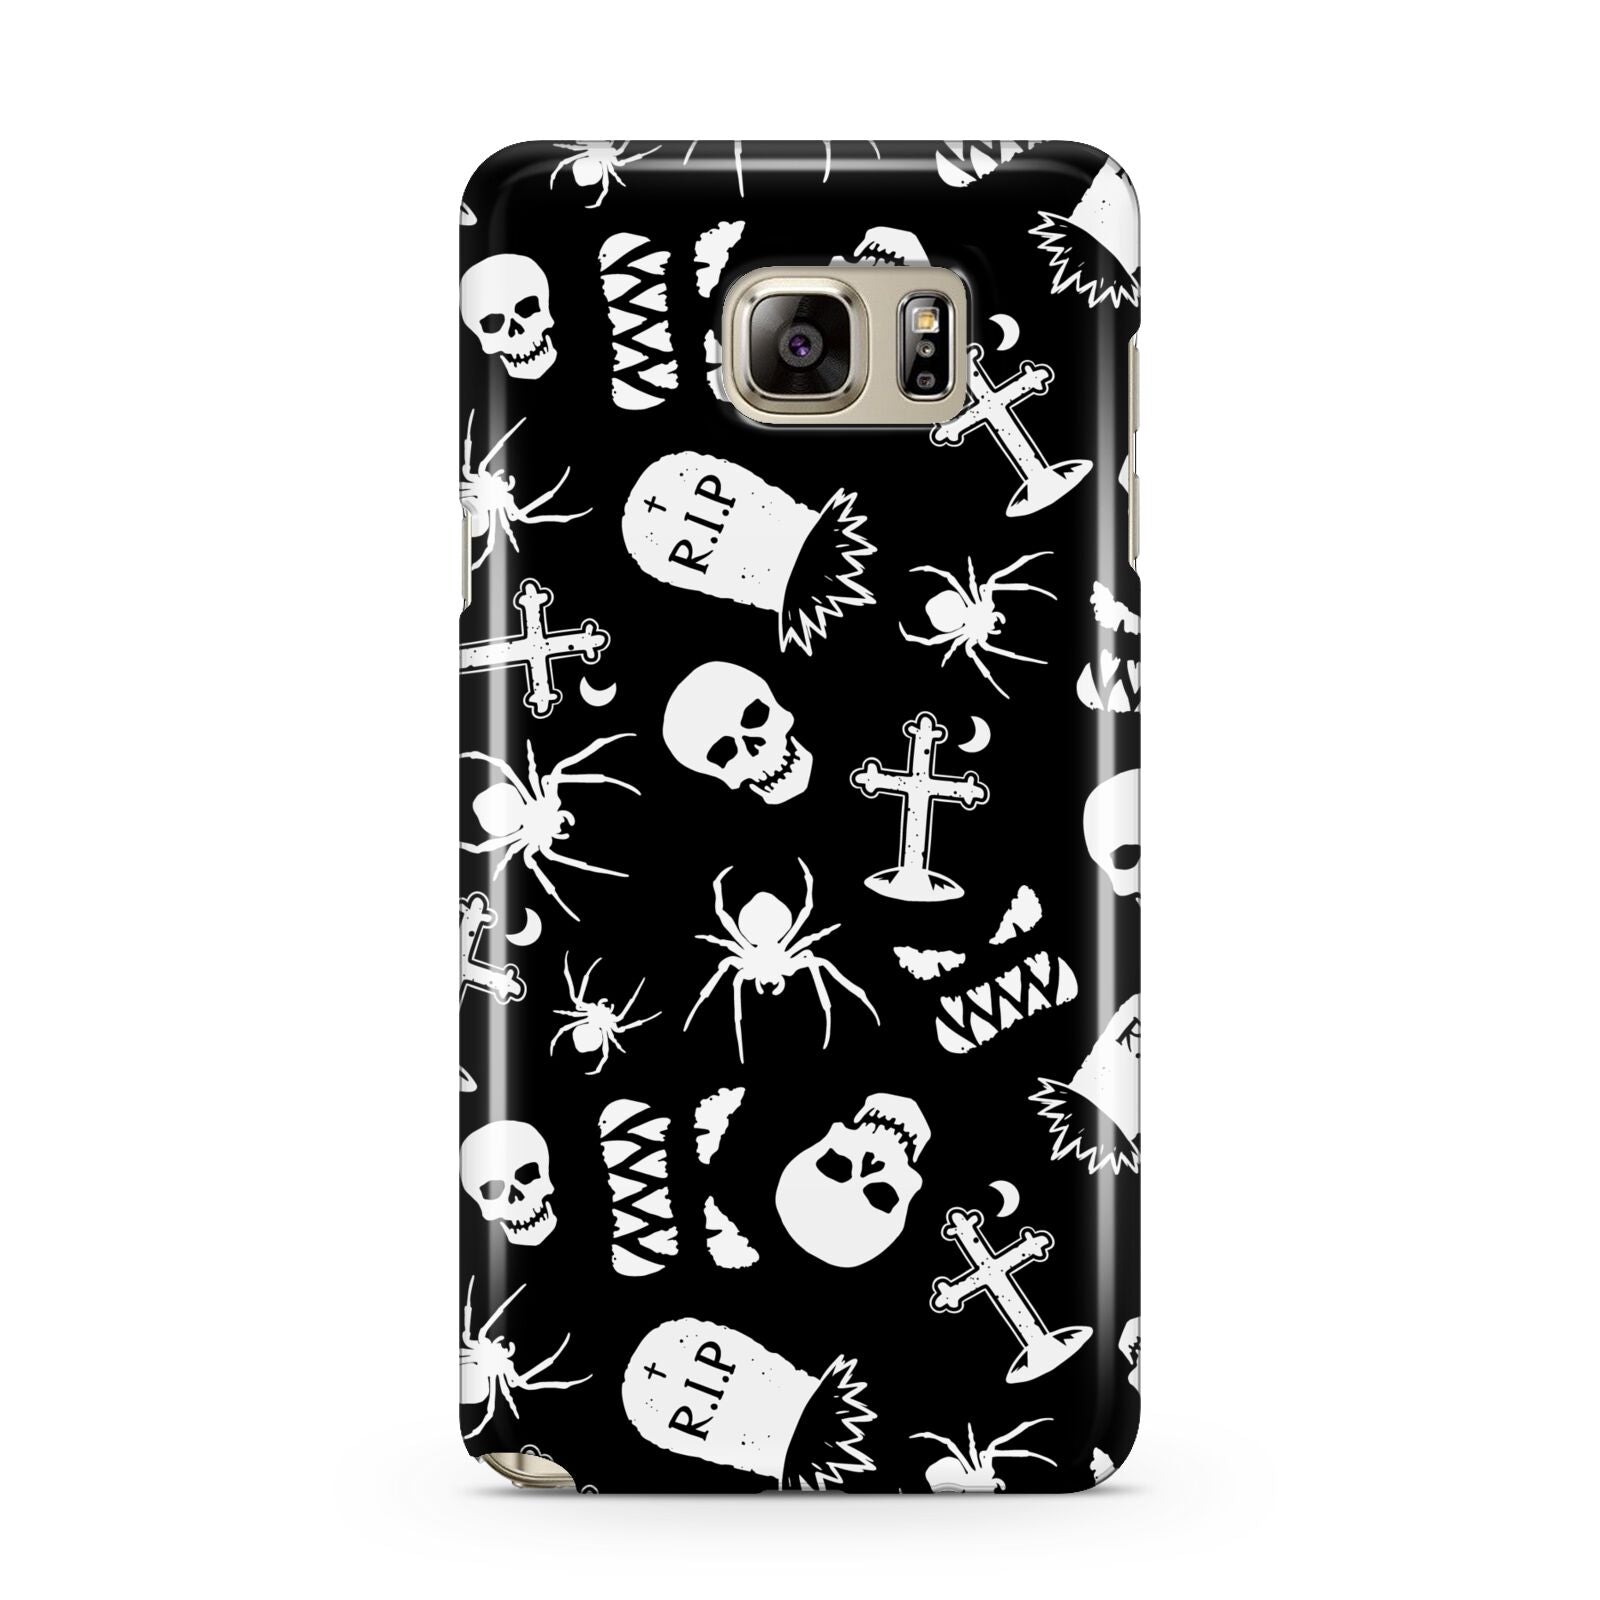 Spooky Illustrations Samsung Galaxy Note 5 Case